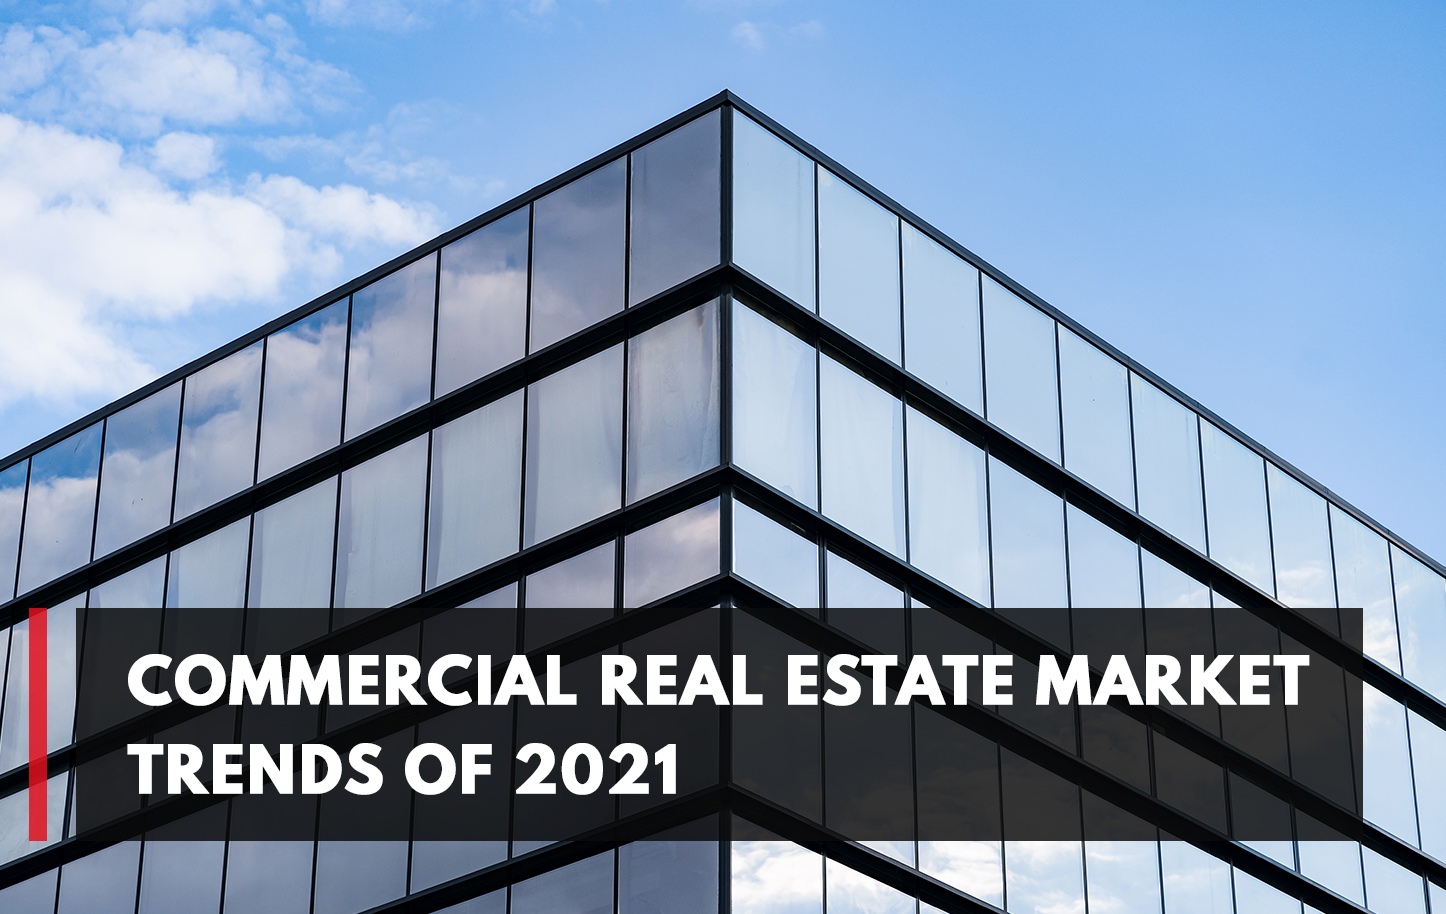 Commercial real estate market trends of 2021 | My Perfect Workplace